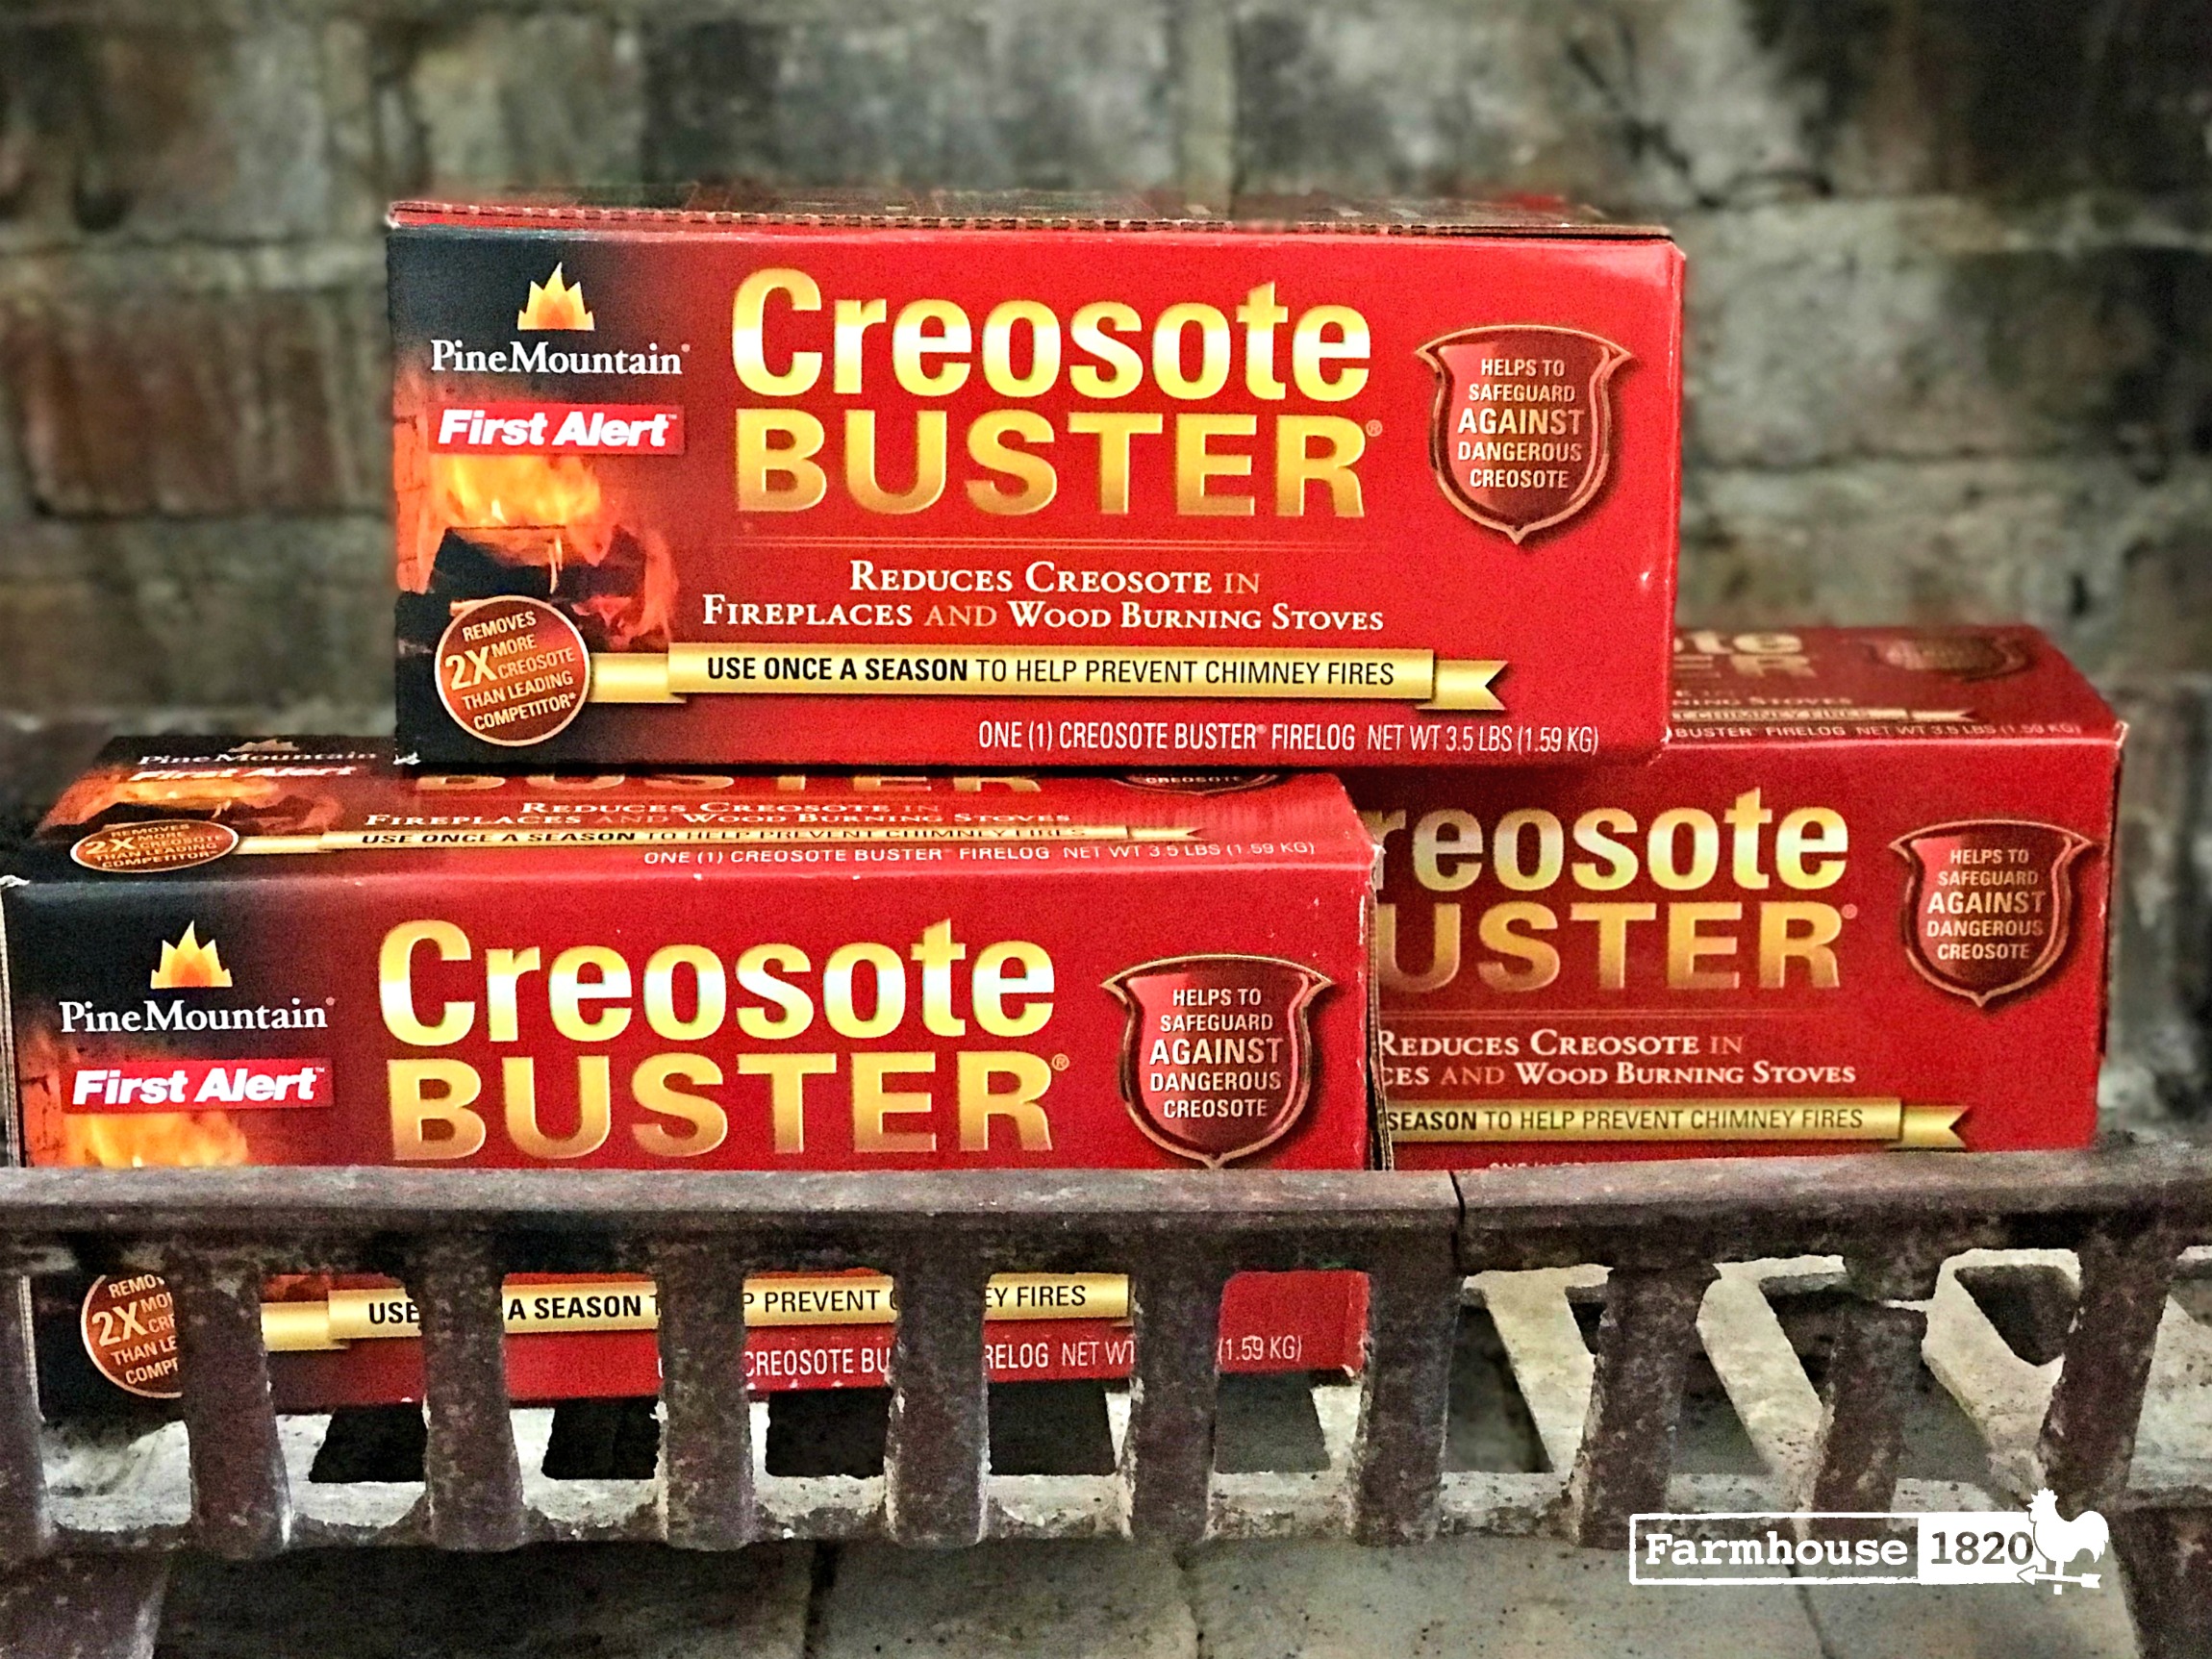 Fireplace - creosote buster for safety